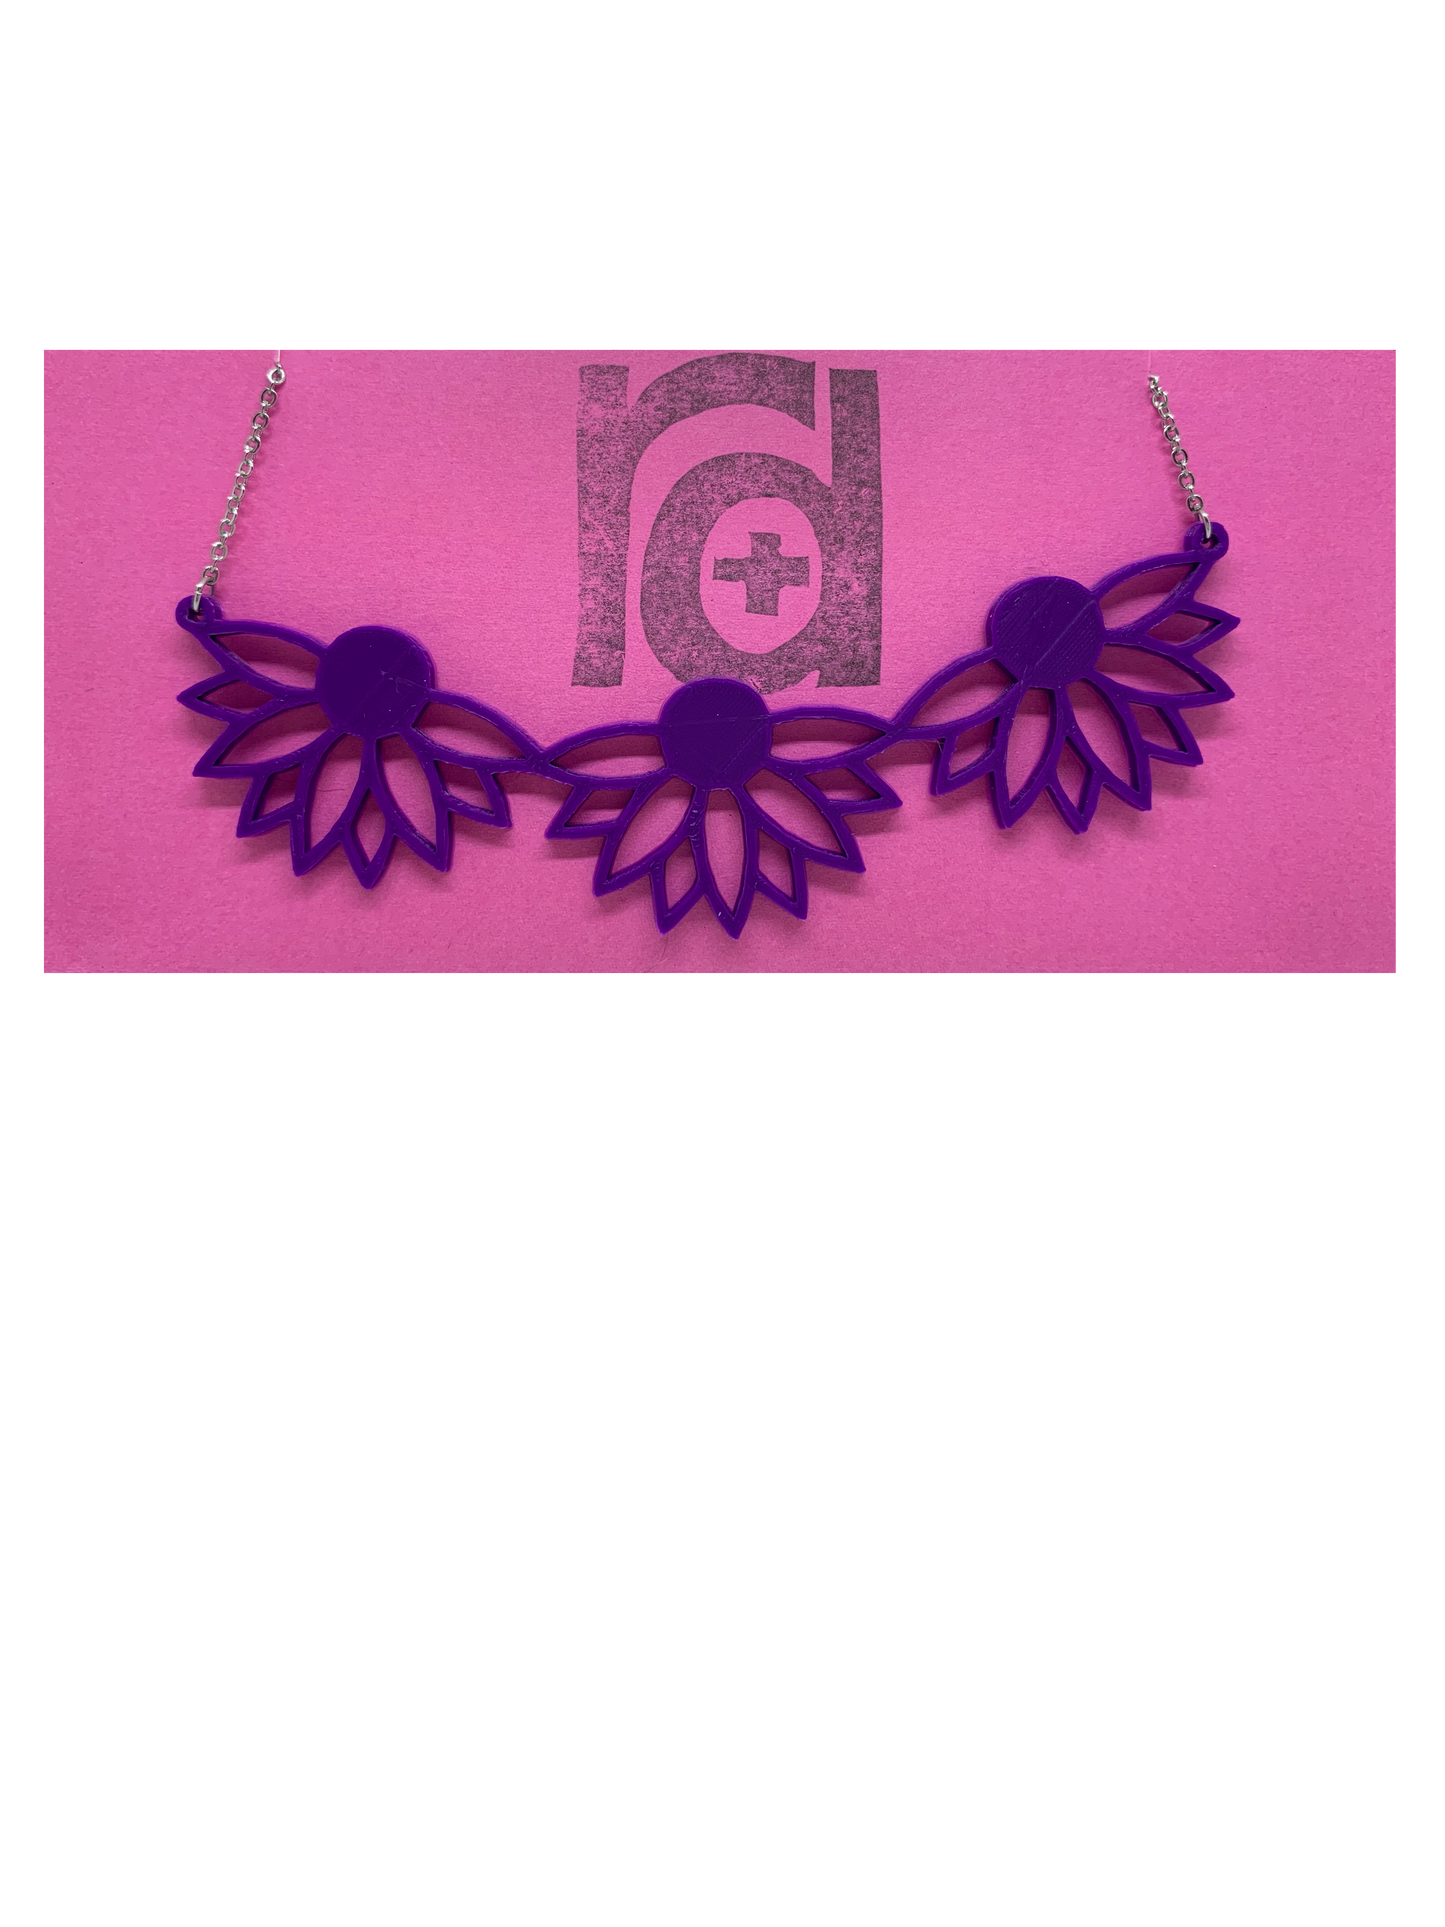 On a bright pink R+D necklace card is a 3D printed necklace. It is a bib necklace that stretches to have three daisys with petals stretching downward. This necklace is printed in a sustainable purple filament. 